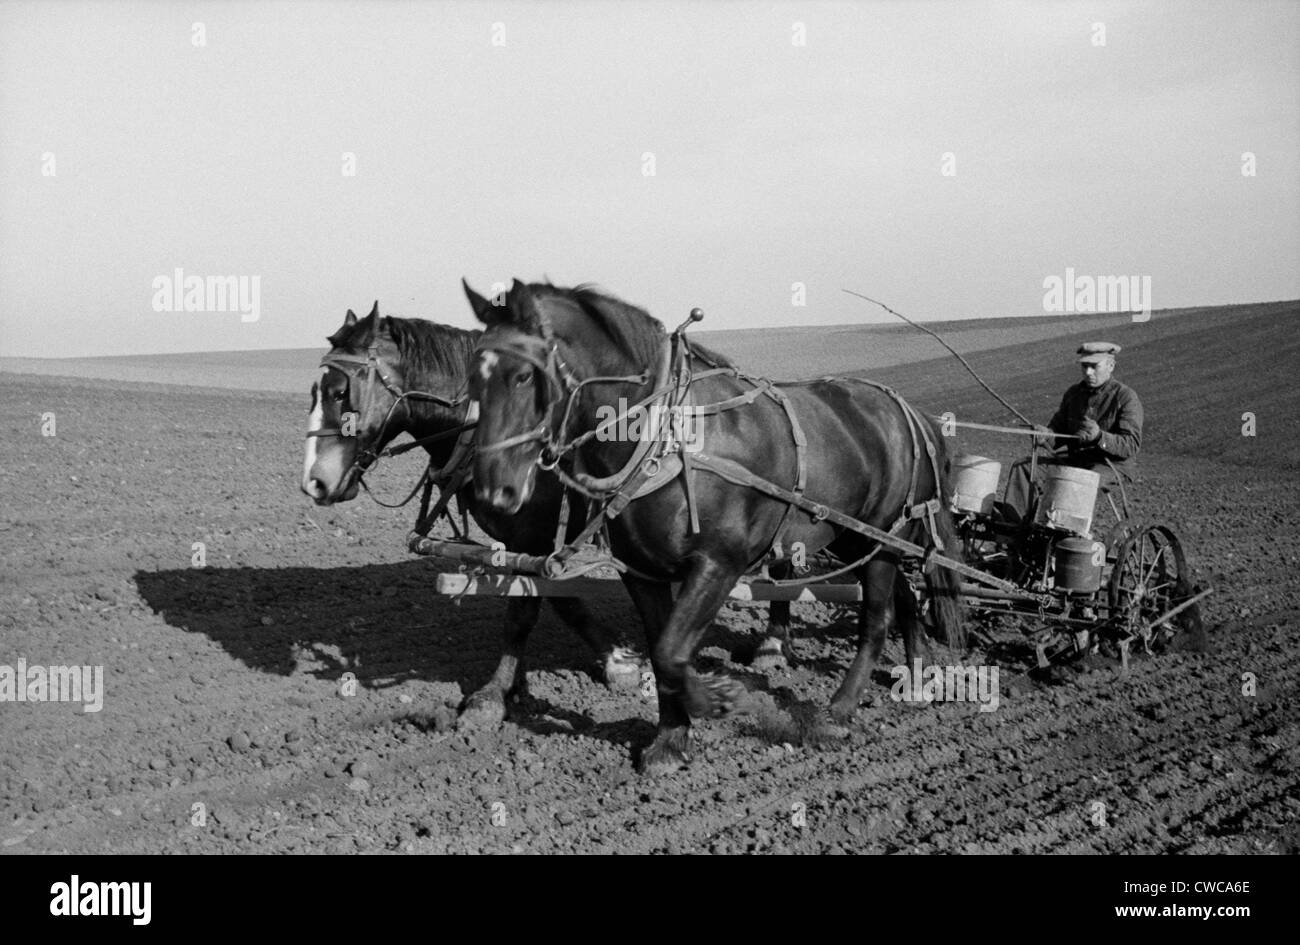 Spring corn planting in Jasper County, Iowa. Two large work horses pull the farmer and his seed drill across the vast field. Stock Photo